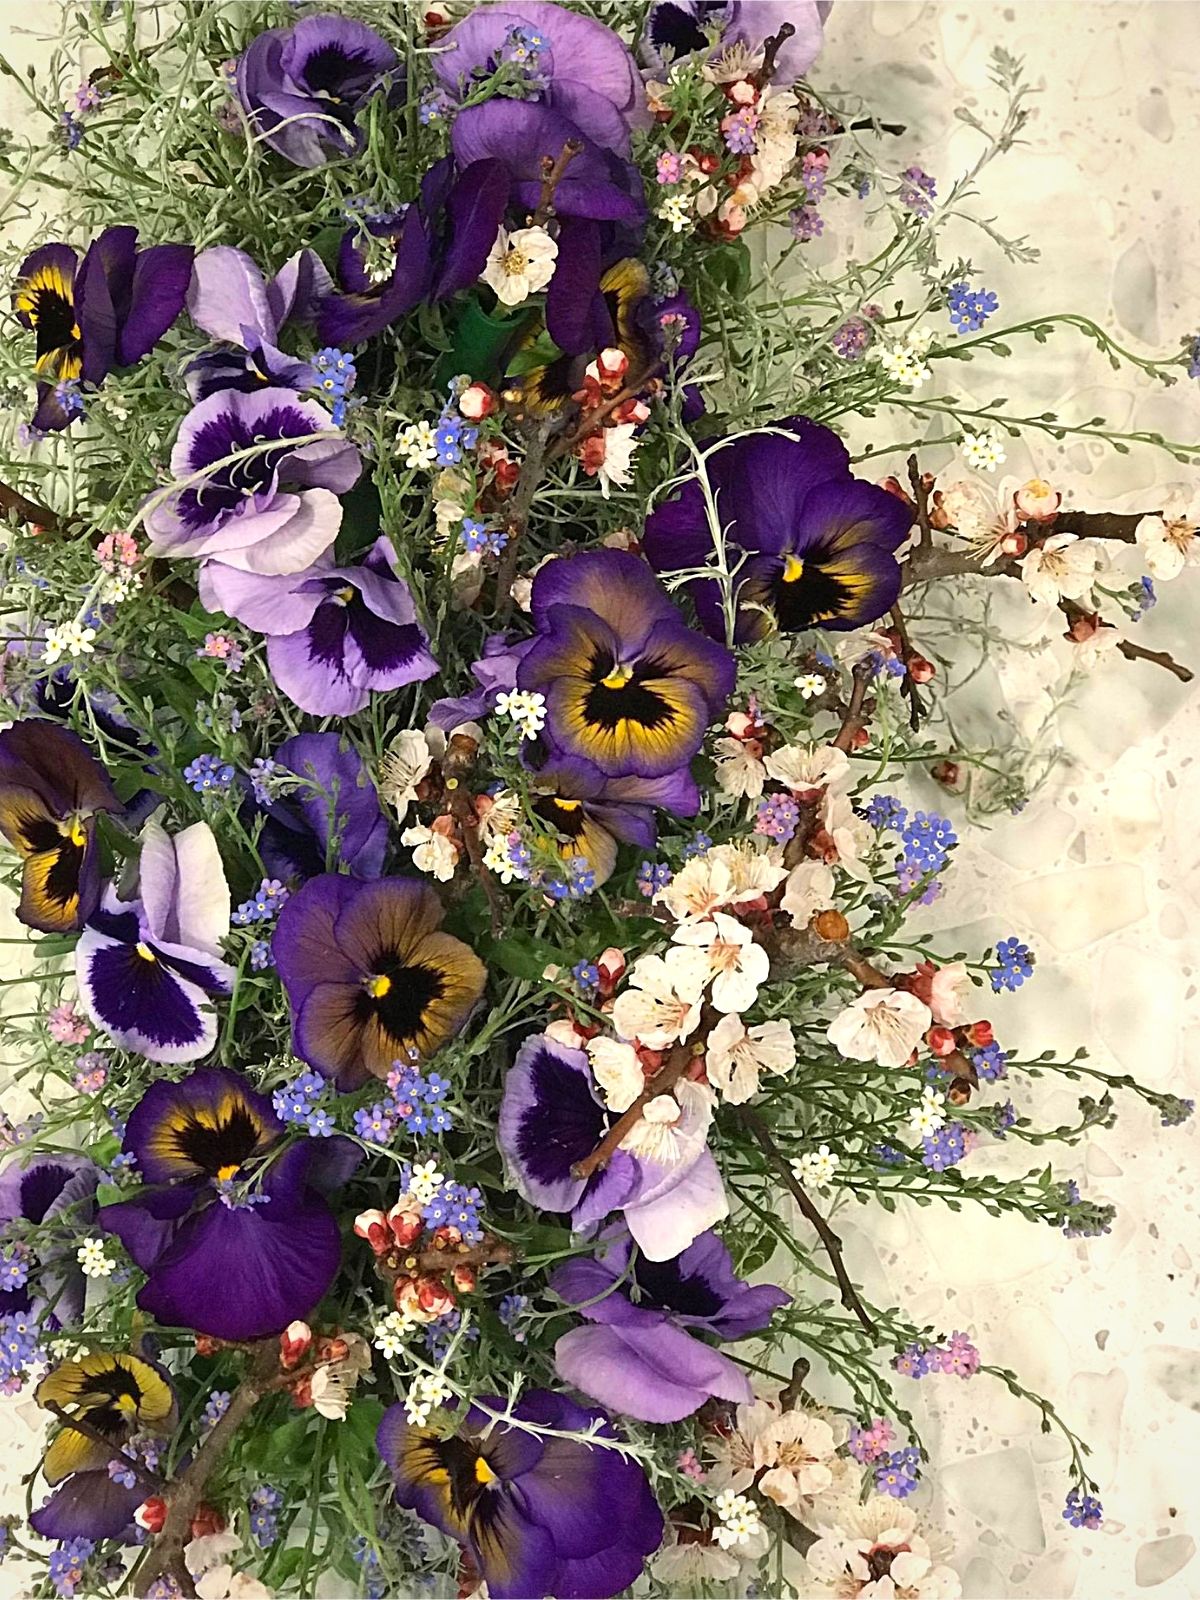 Beautiful in Its Simplicity With Pansies - Blog on Thursd (5)